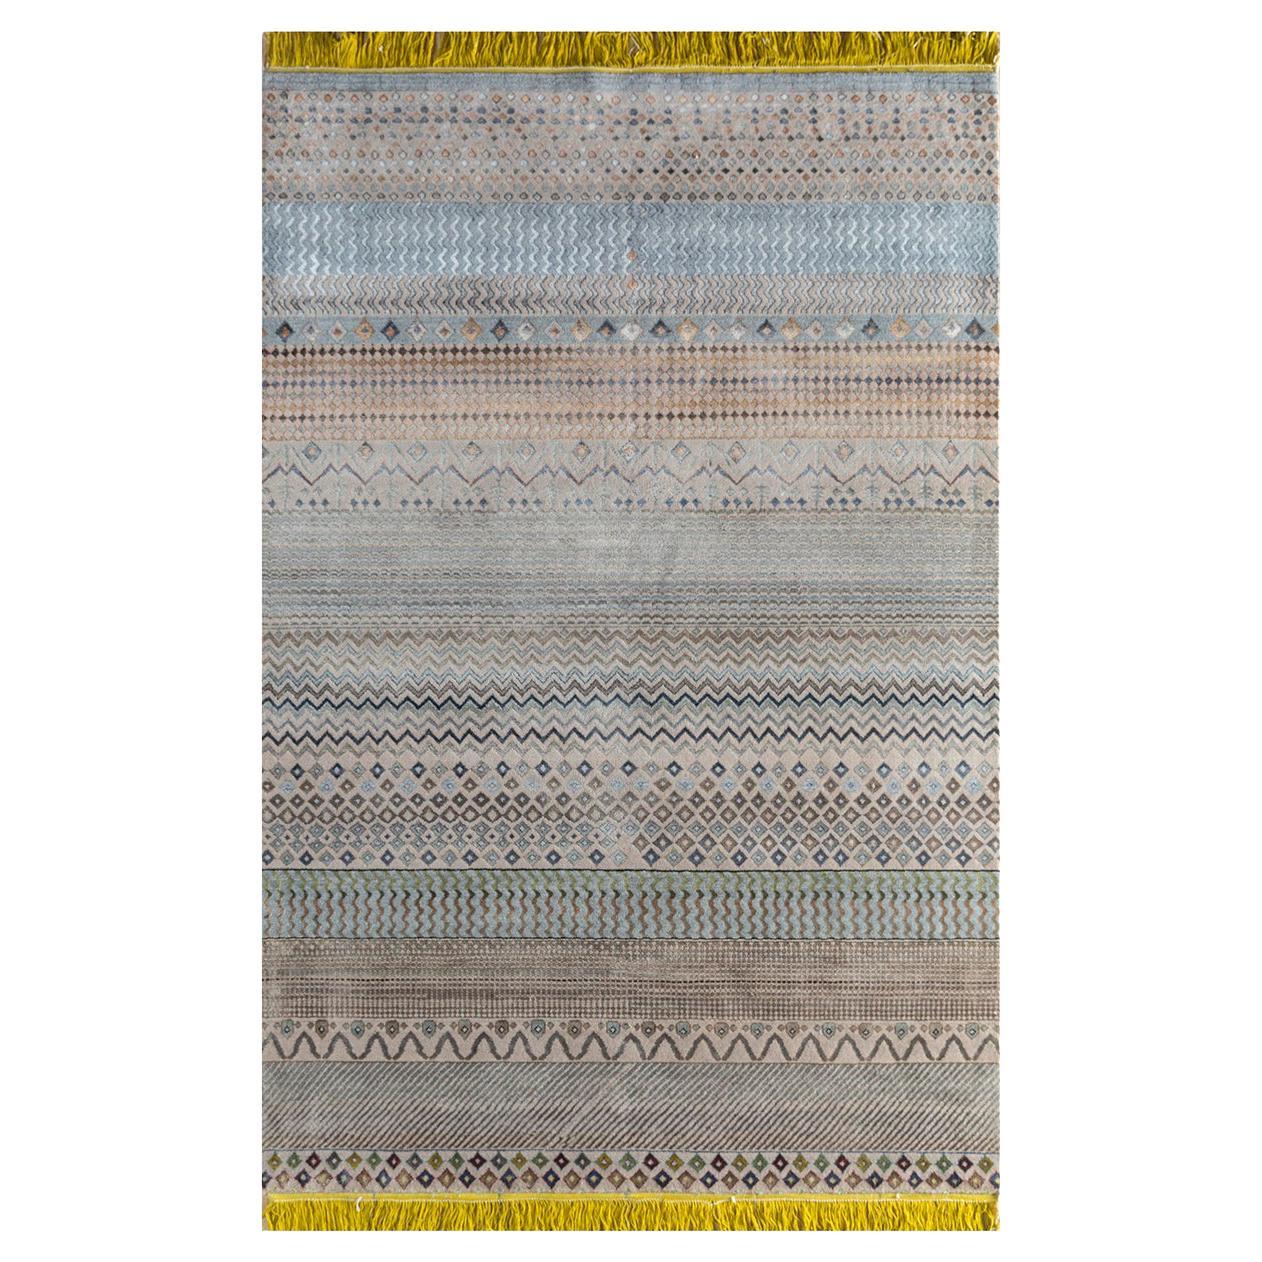 One of a Kind Do Hanso Ka Joda Rug, Knotted, Wool, Bamboo Silk, 180x270cm For Sale